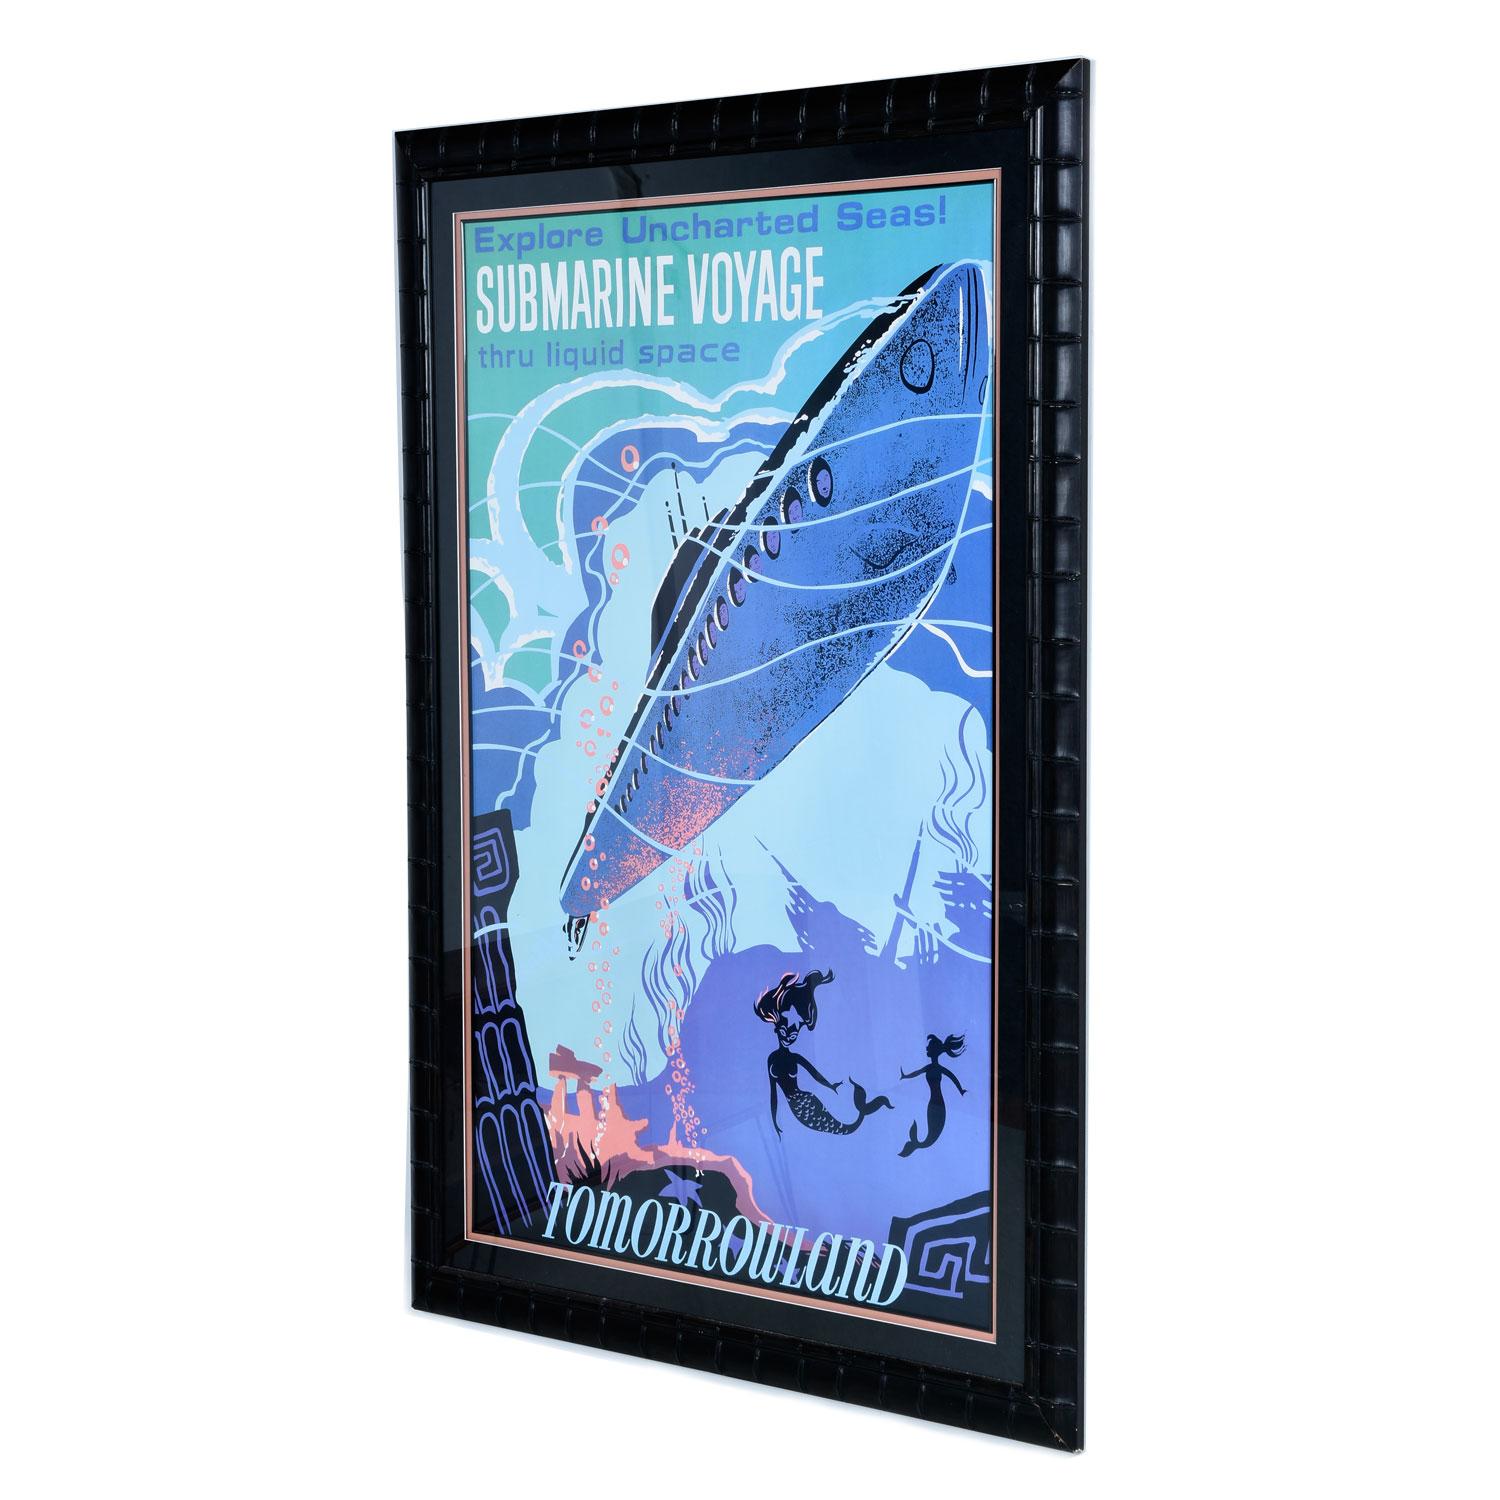 You may have seen the Disney Tomorrowland Submarine Voyage poster before, but you haven’t seen it like this. This print is massive standing at approximately 4 × 5 feet! The size isn’t the only thing that sets our print apart. The collectible Disney